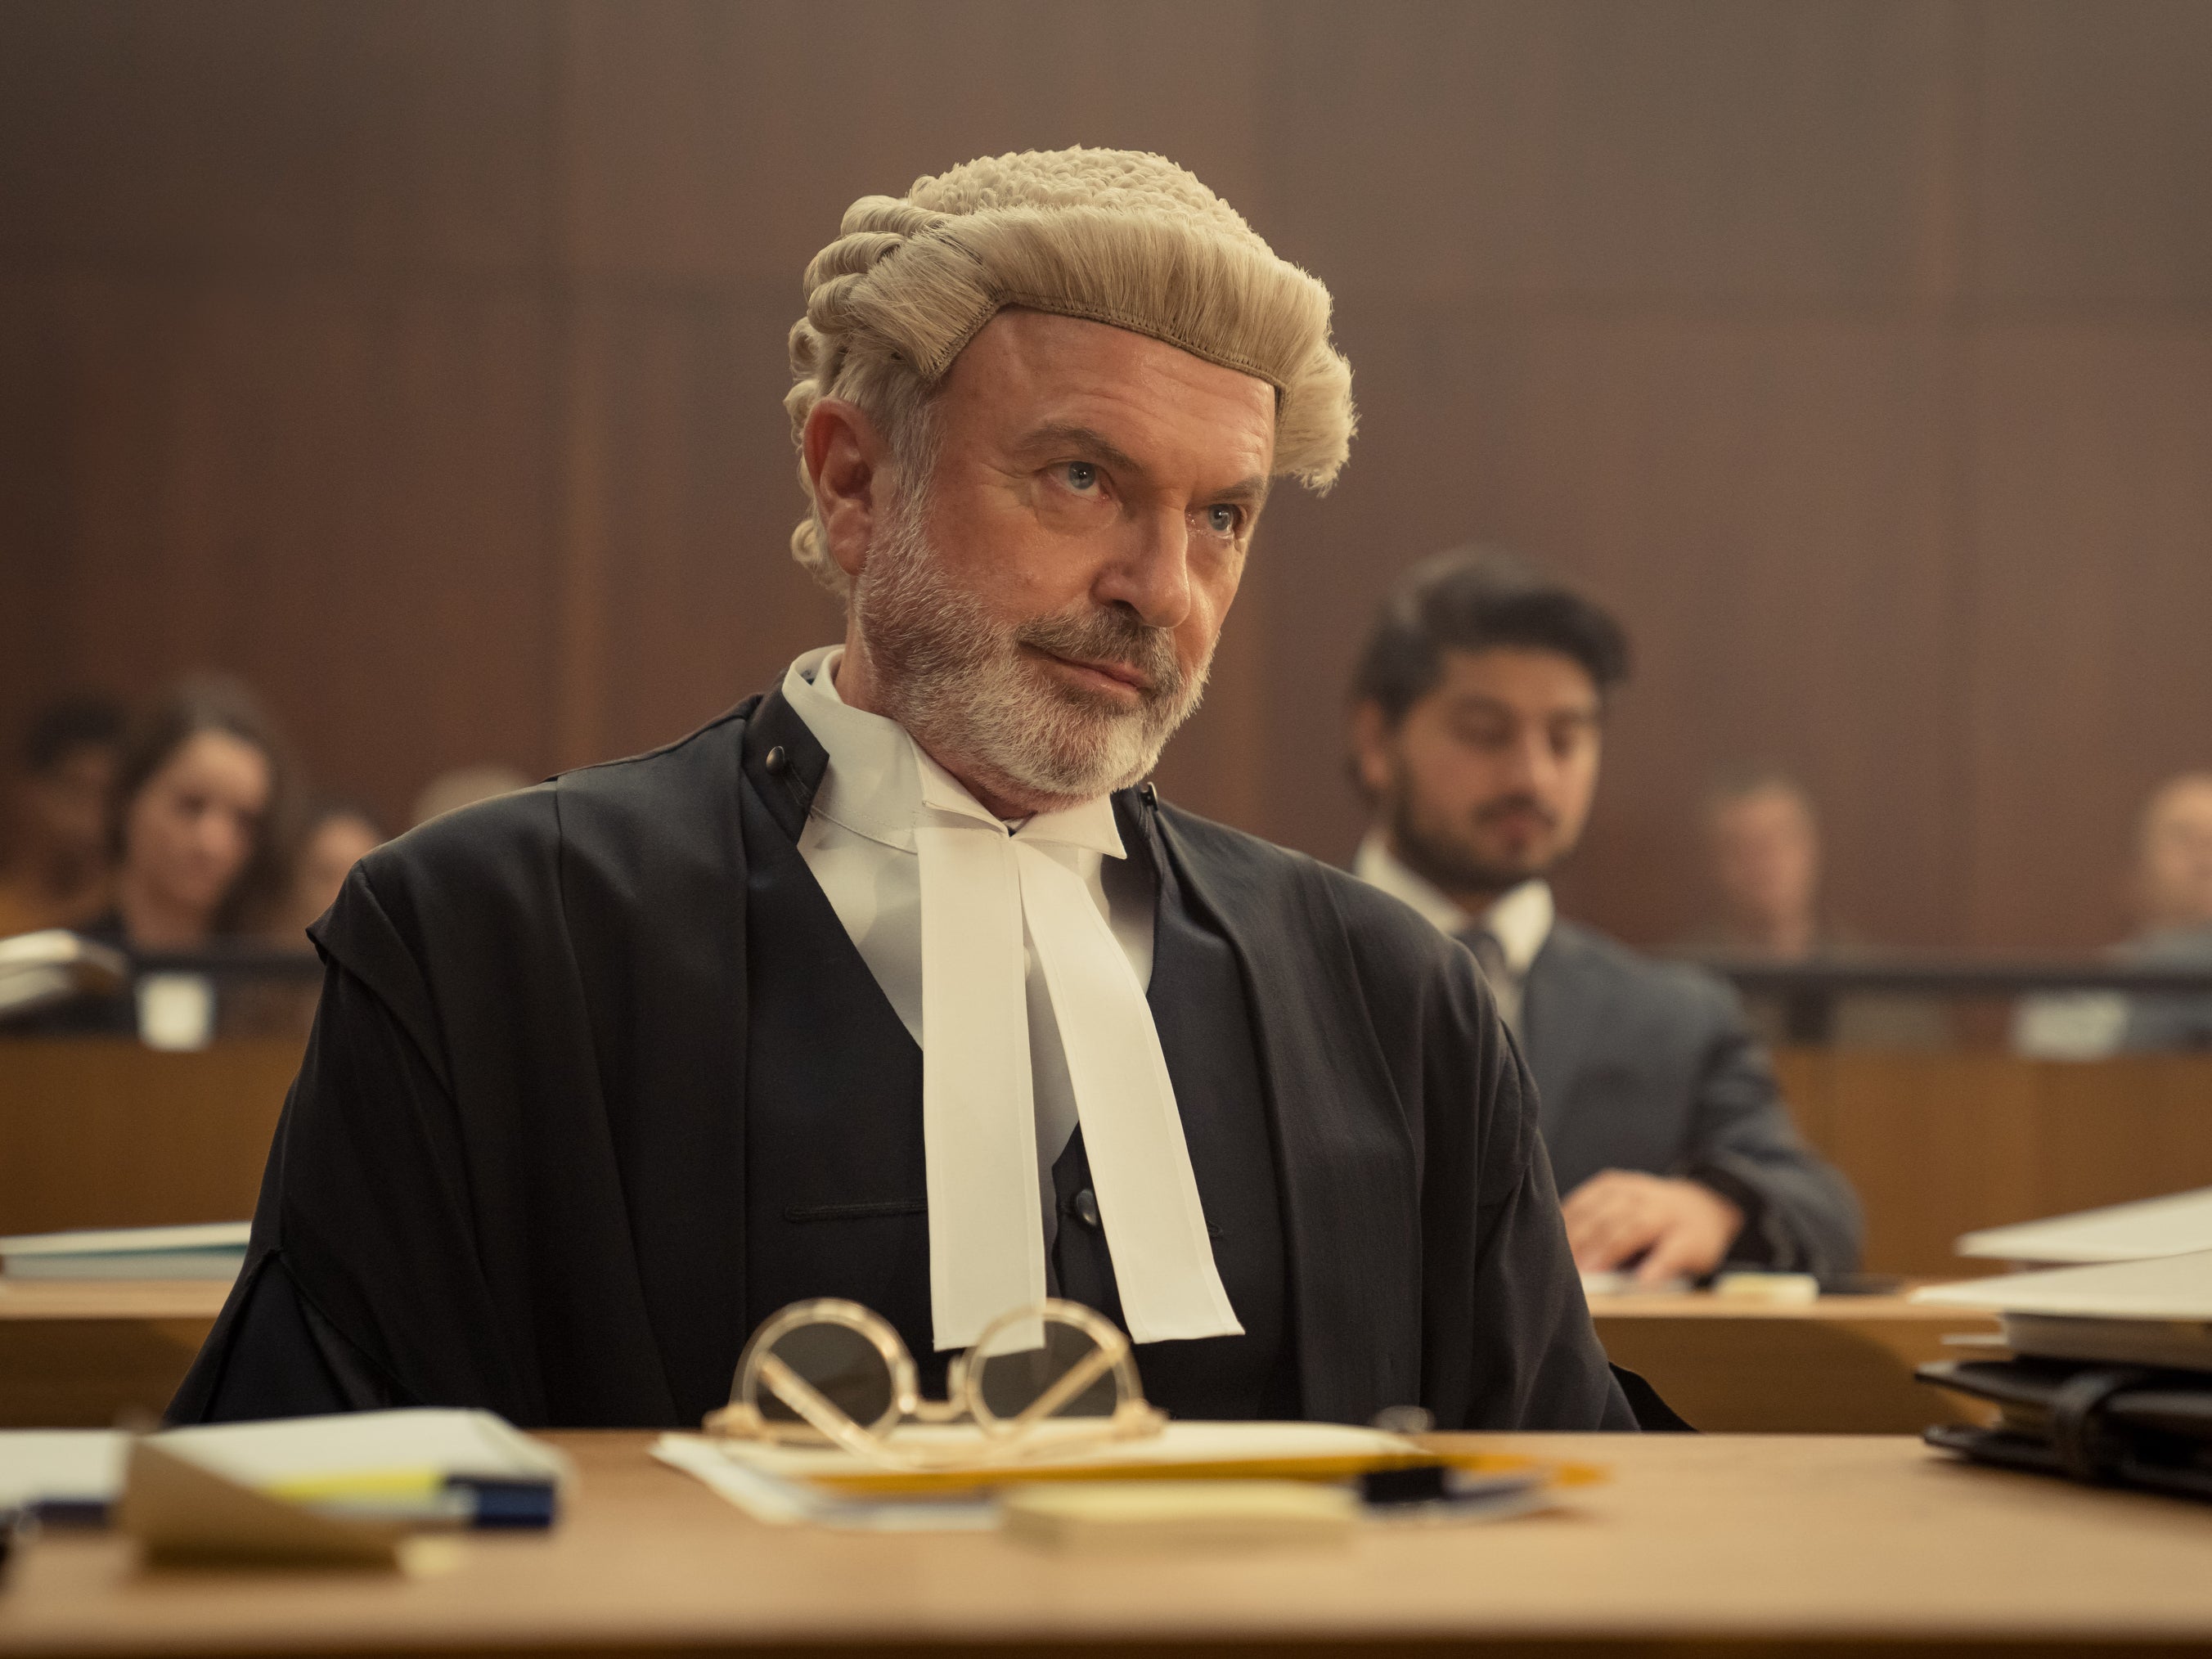 Man of the law: Sam Neill in new legal drama ‘The Twelve’